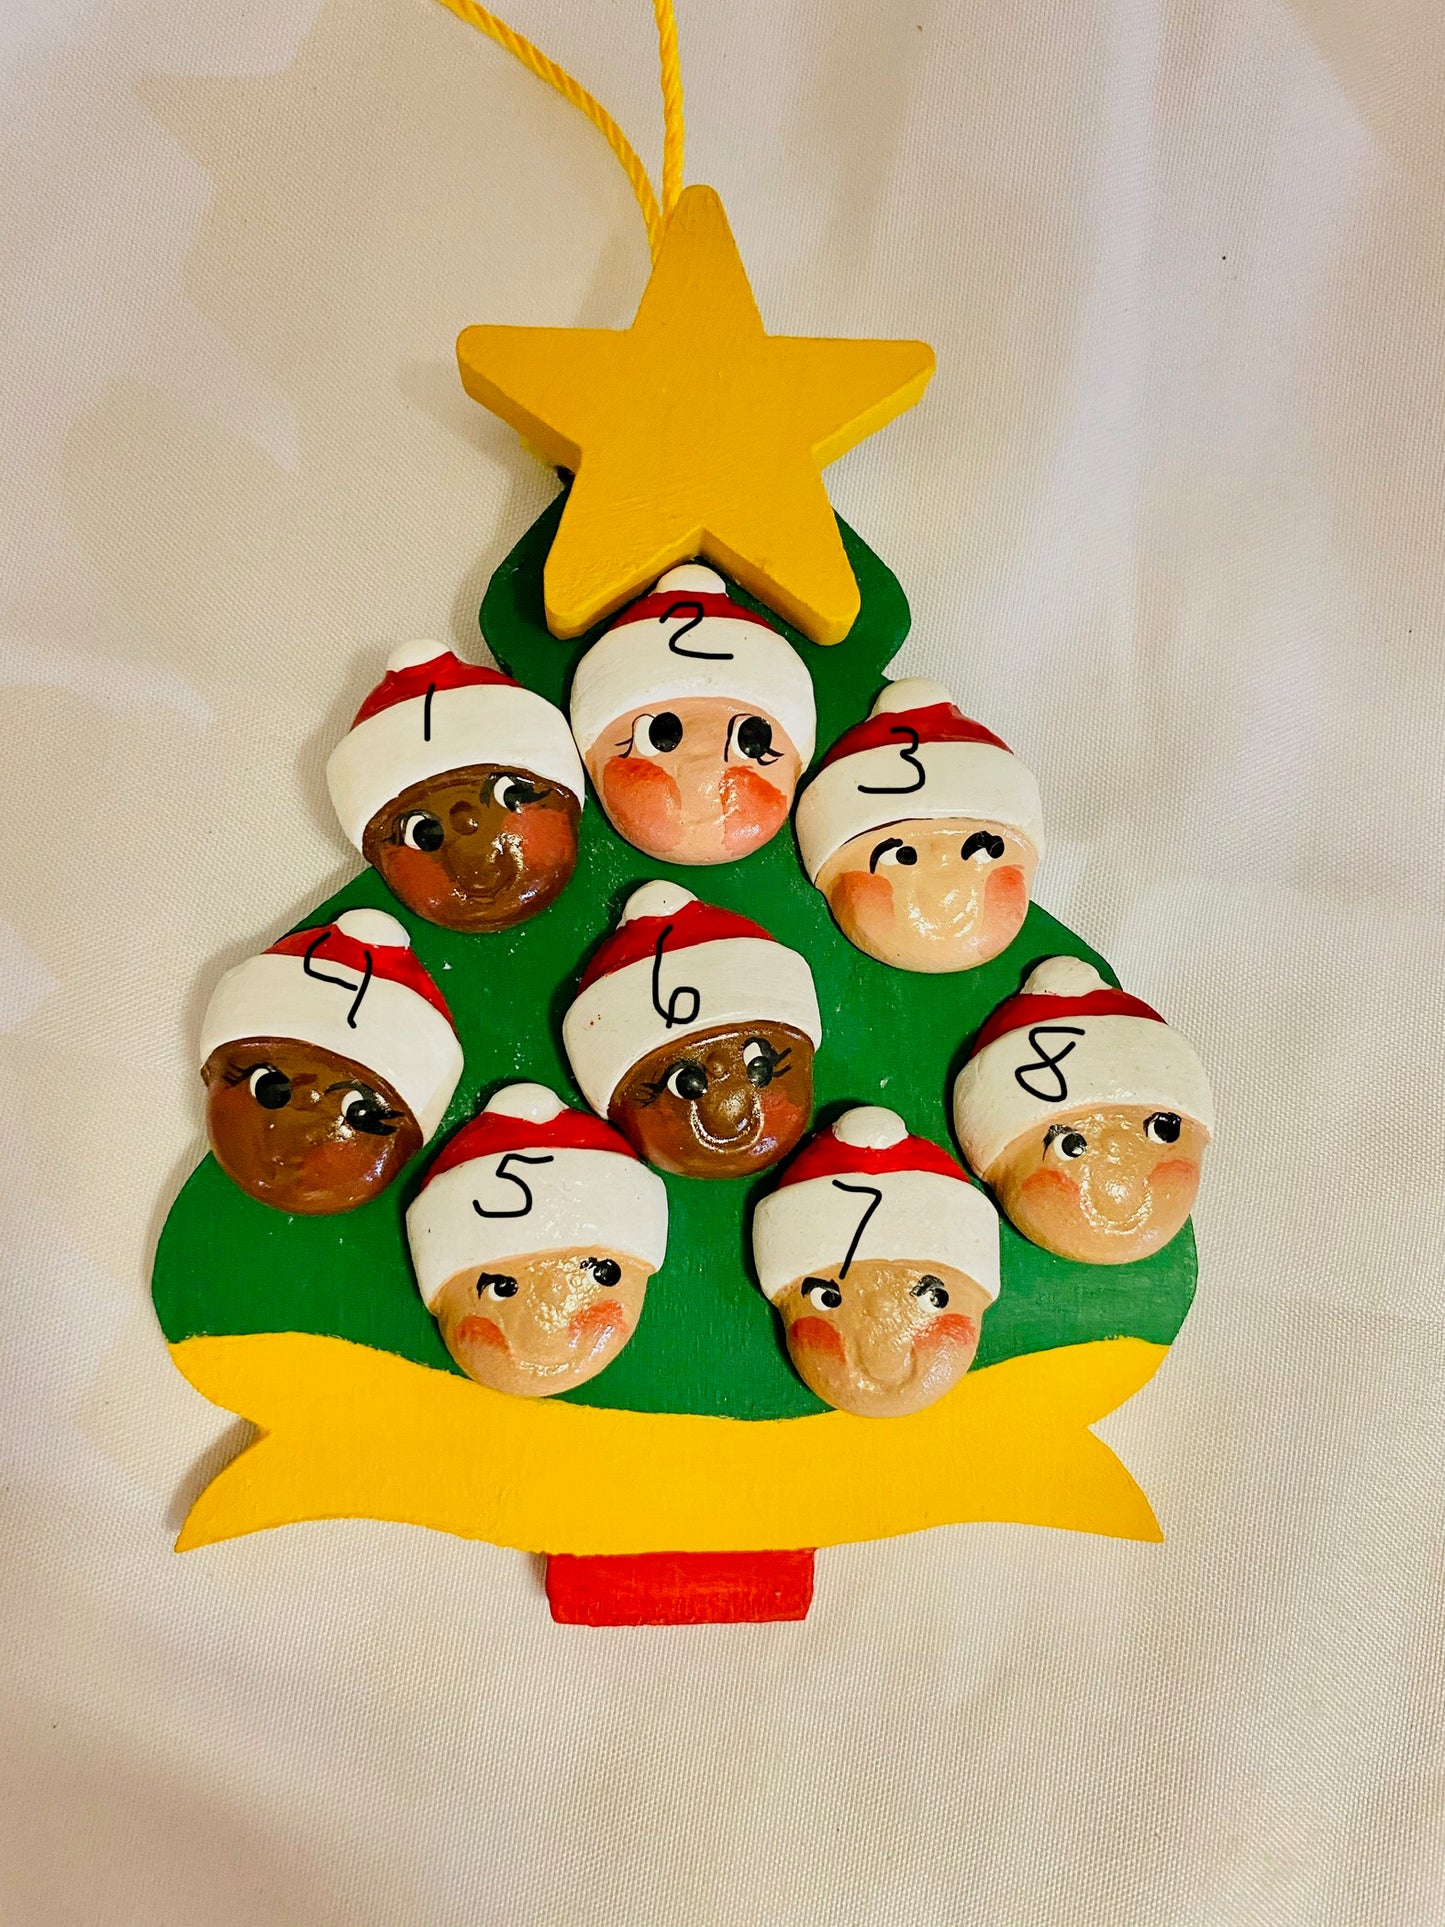 Personalized Ornament 8 Santa Faces on a Christmas Tree 4.5" x 3.5""